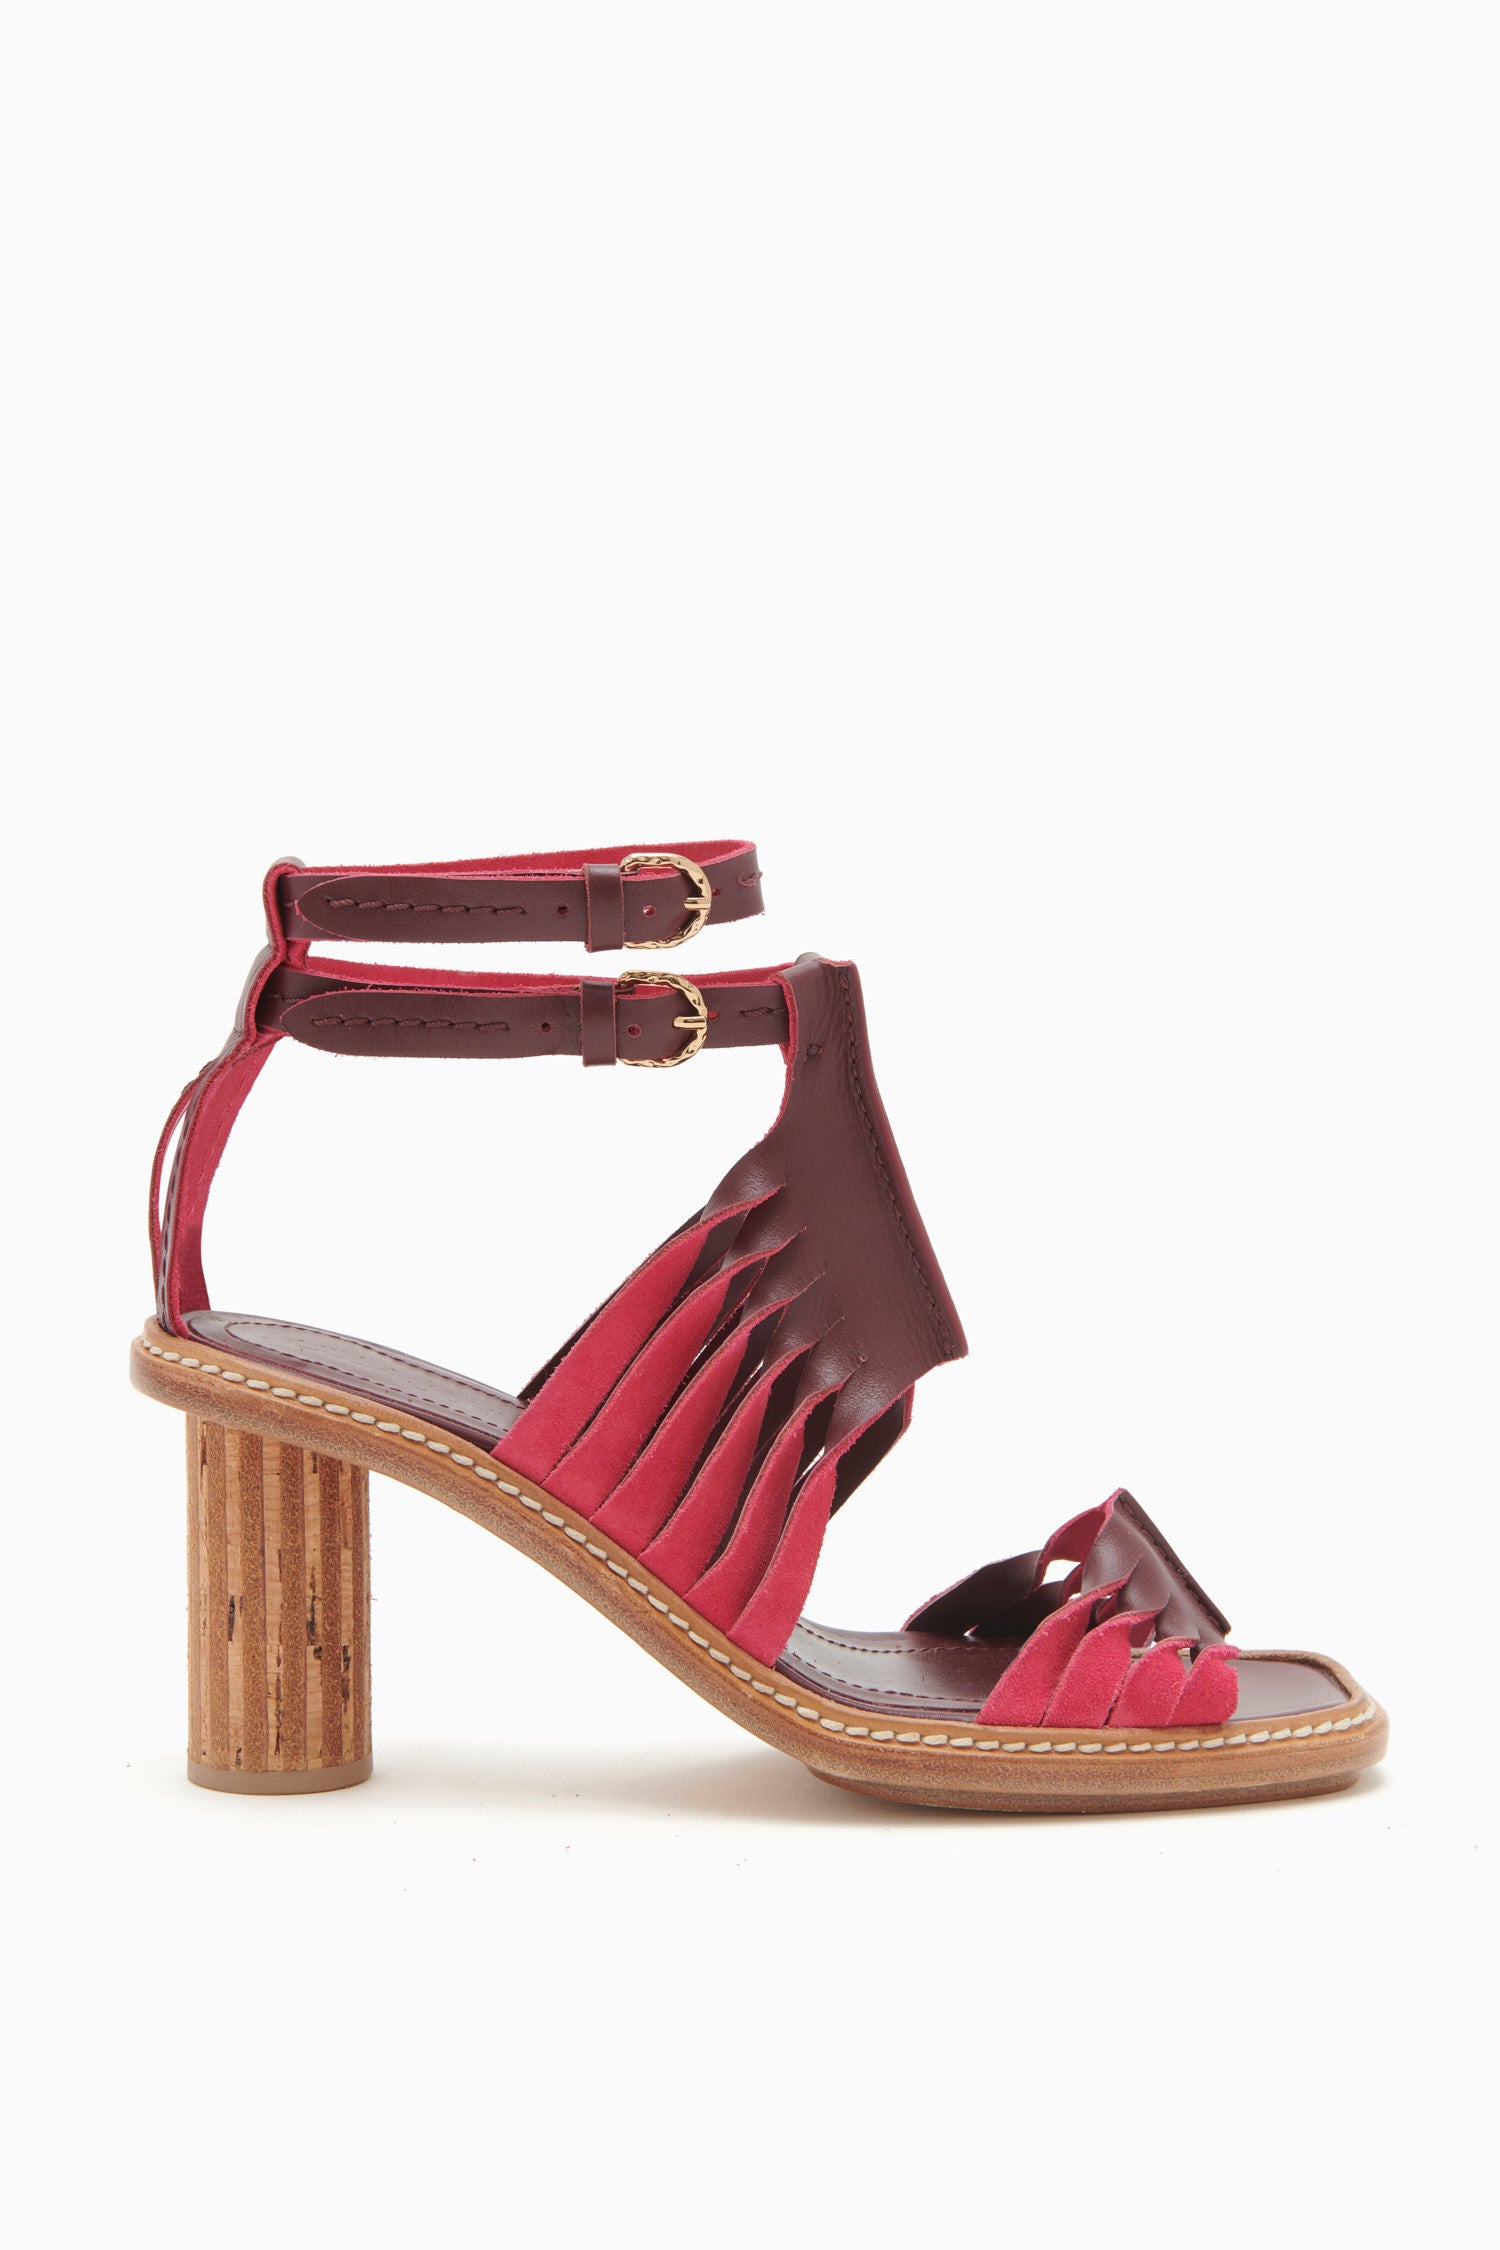 Ulla Johnson Madeira Twisted Contrast High Heel - Orchid Colorblock